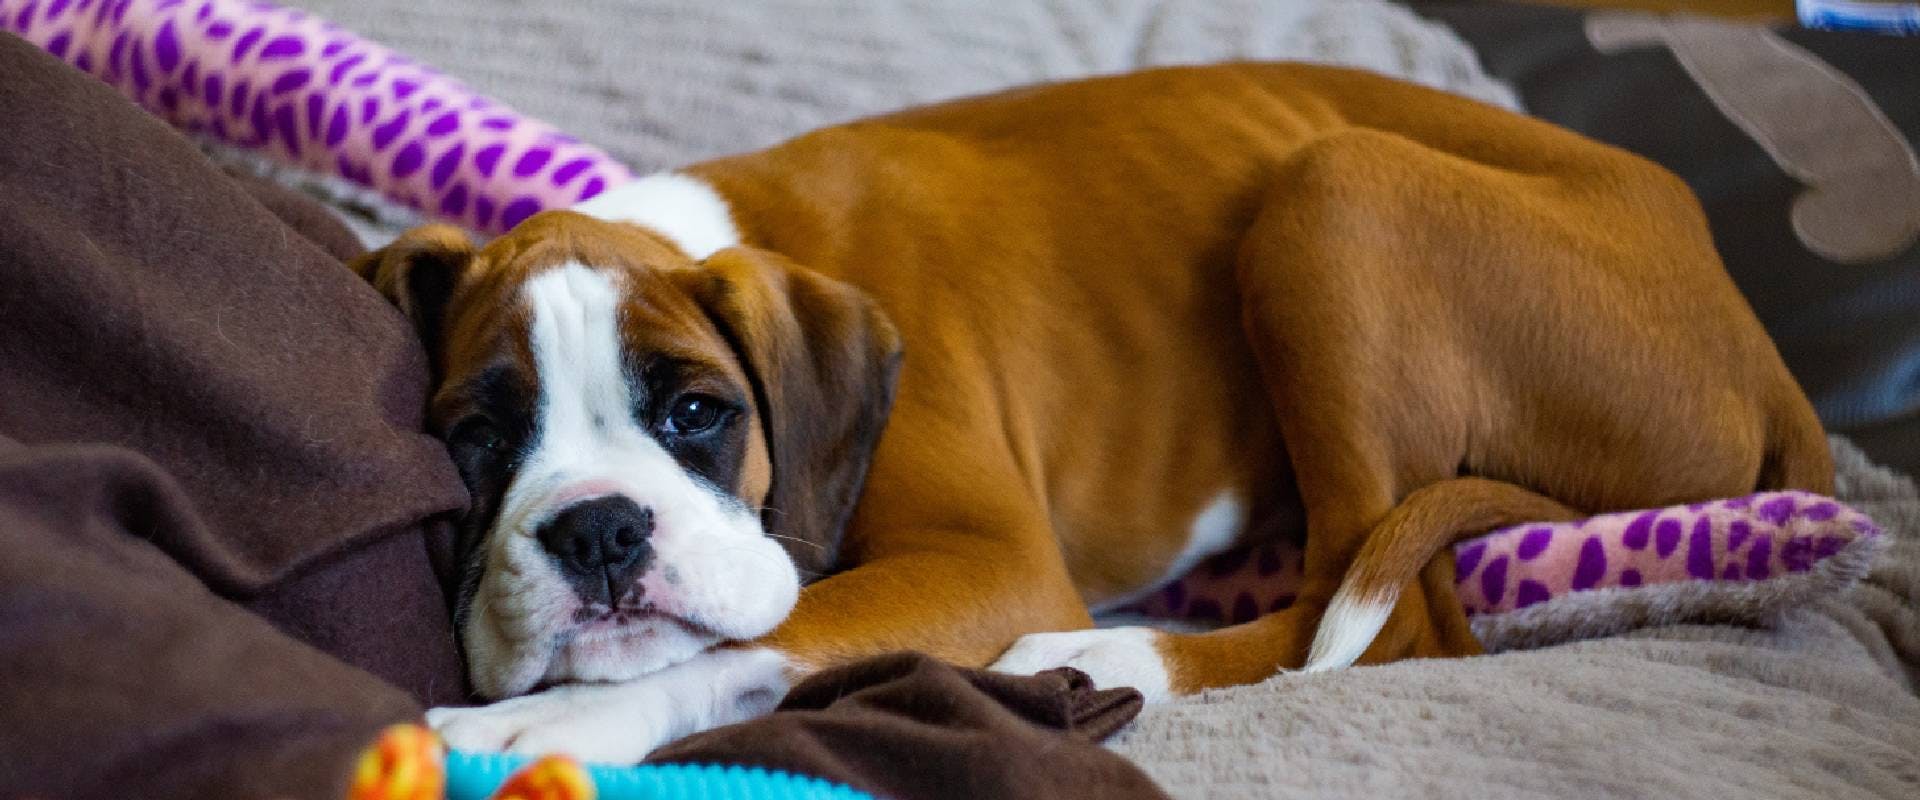 Boxer puppy on a sofa